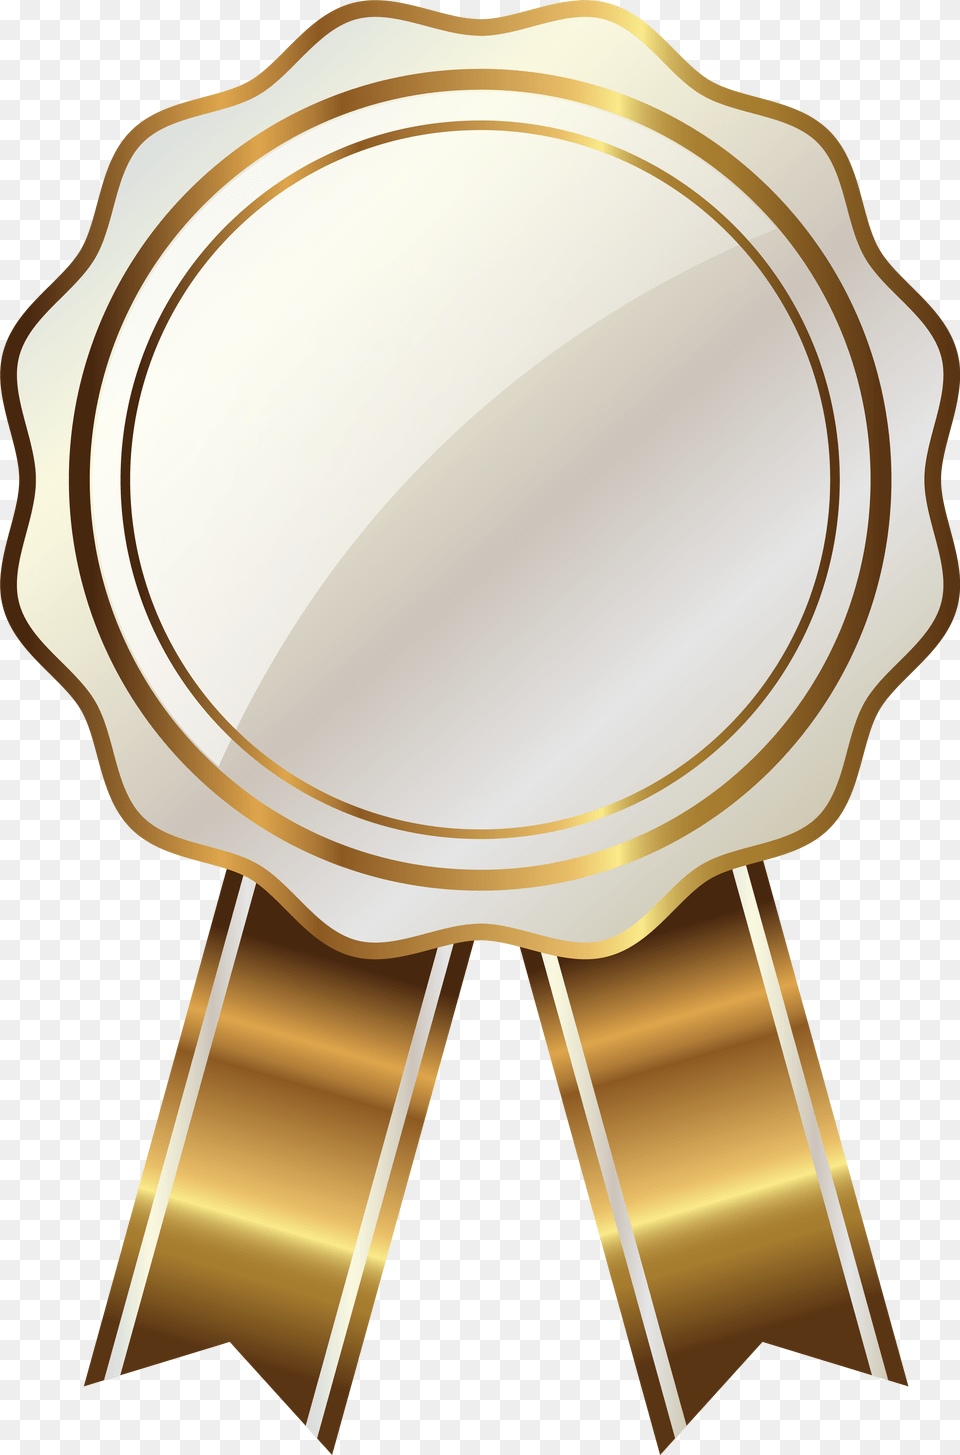 White Seal With Gold Ribbon Clipart Gold Ribbon Clip Art, Mirror Free Png